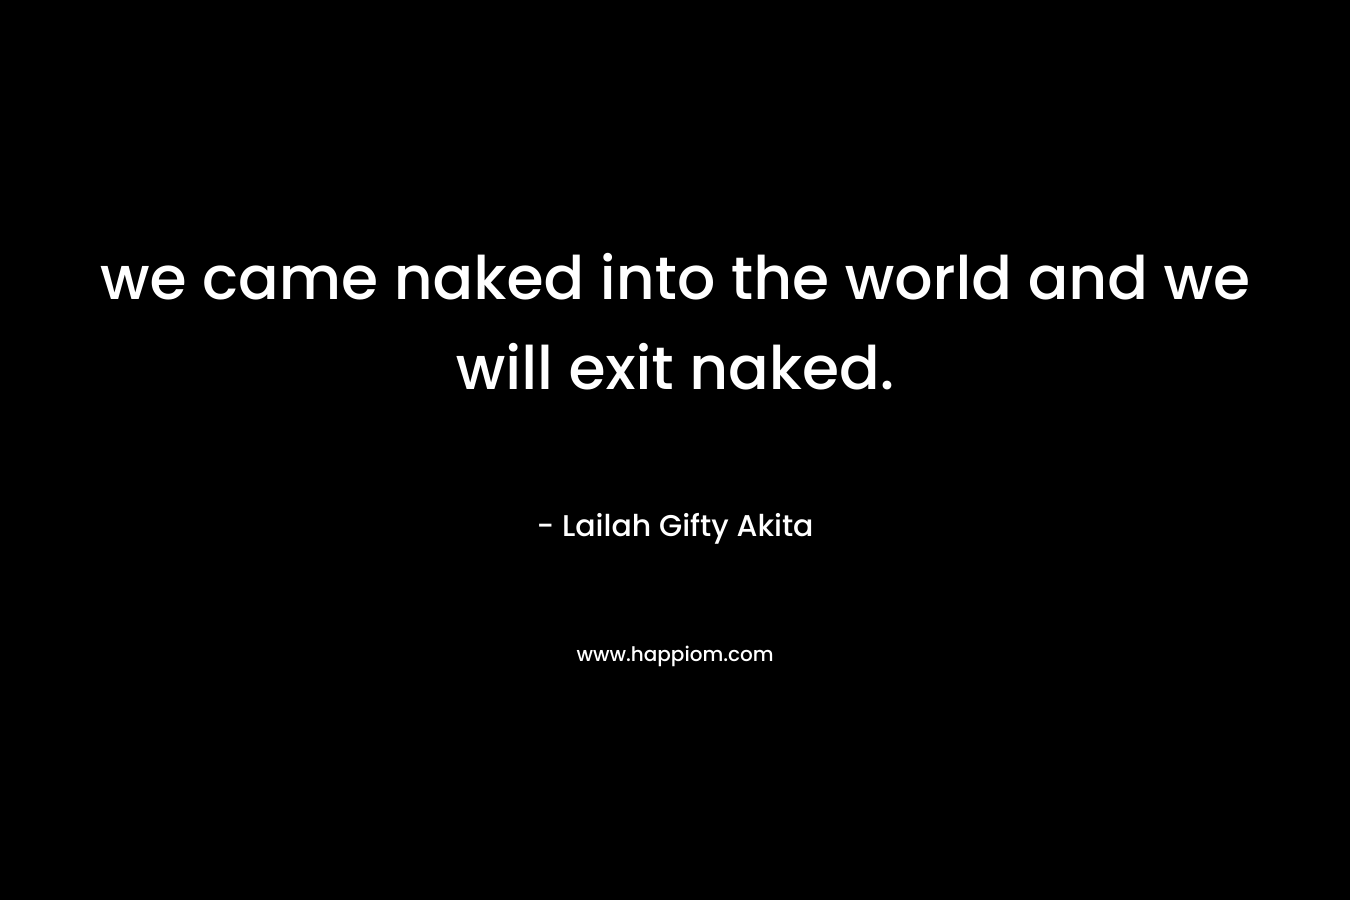 we came naked into the world and we will exit naked.